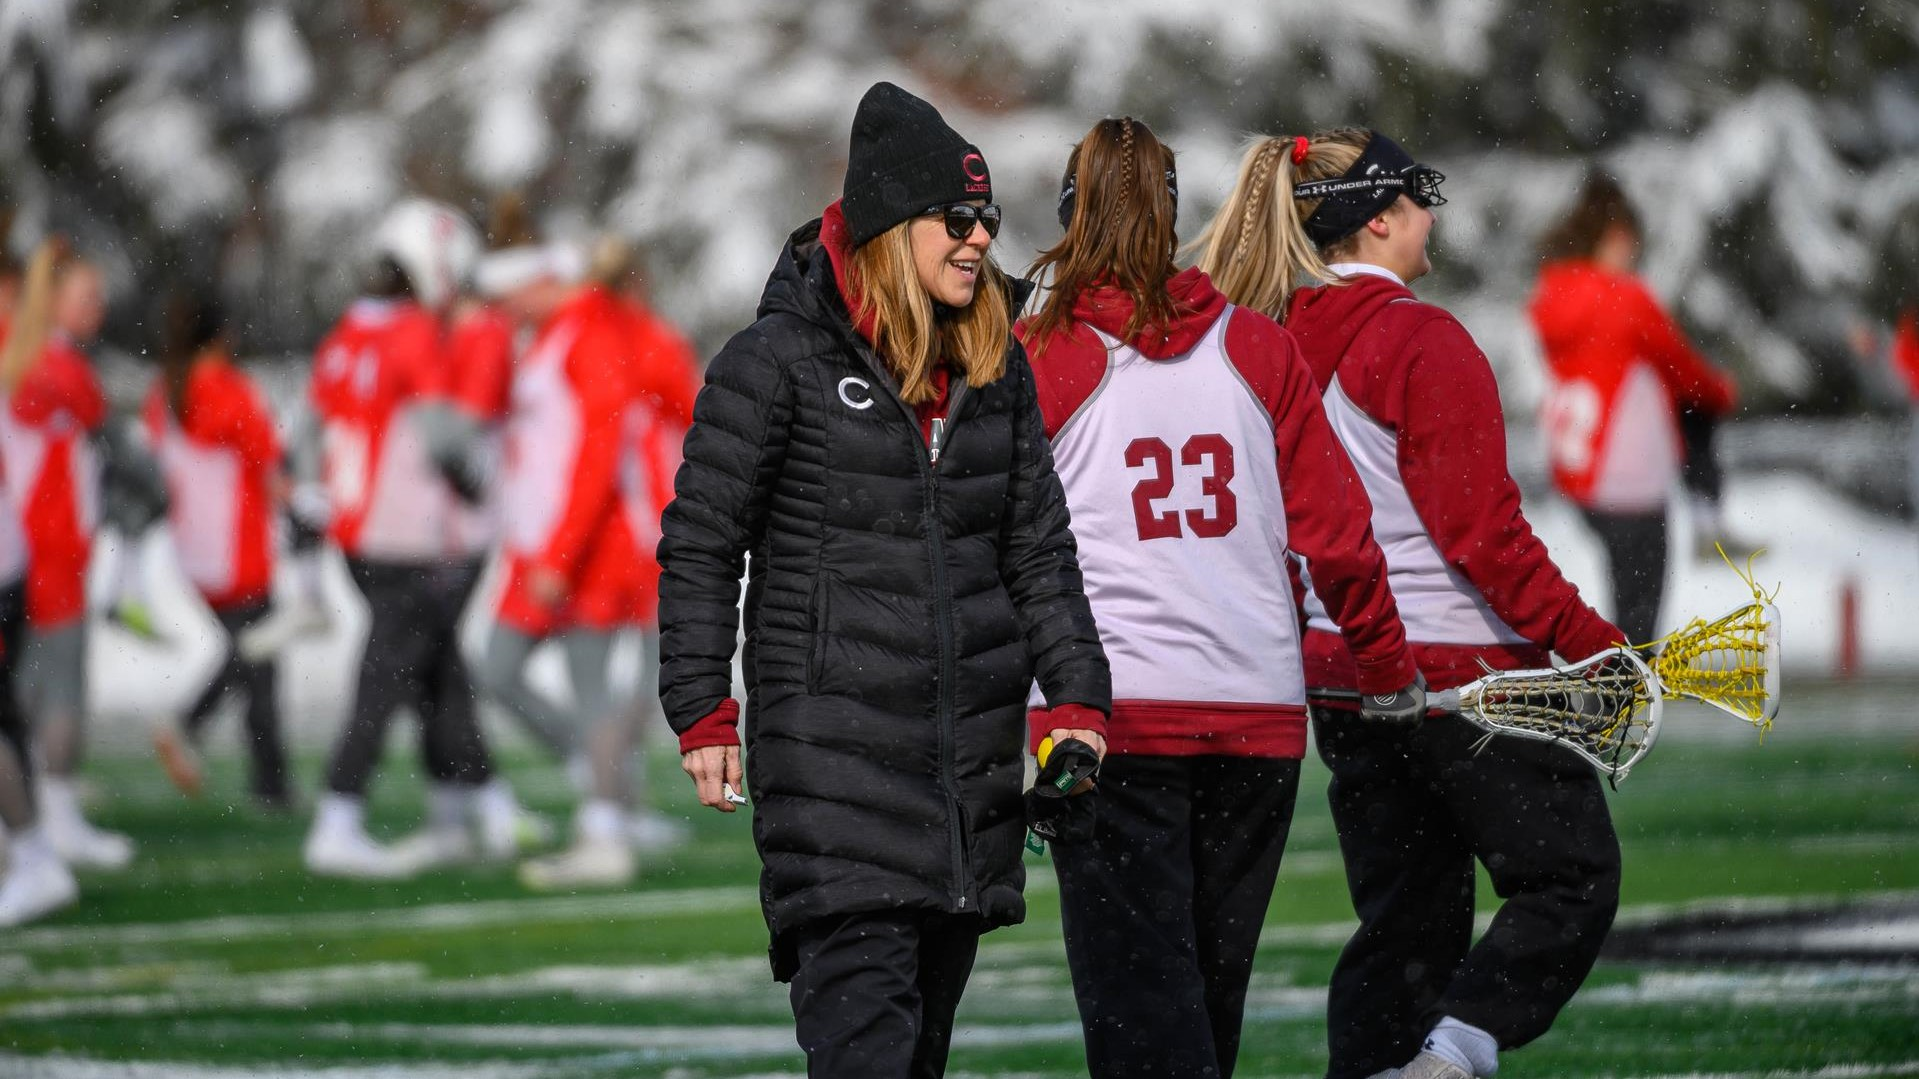 Live Updates: University Issues Statement Regarding Reports of Misconduct by Women’s Lacrosse Coach